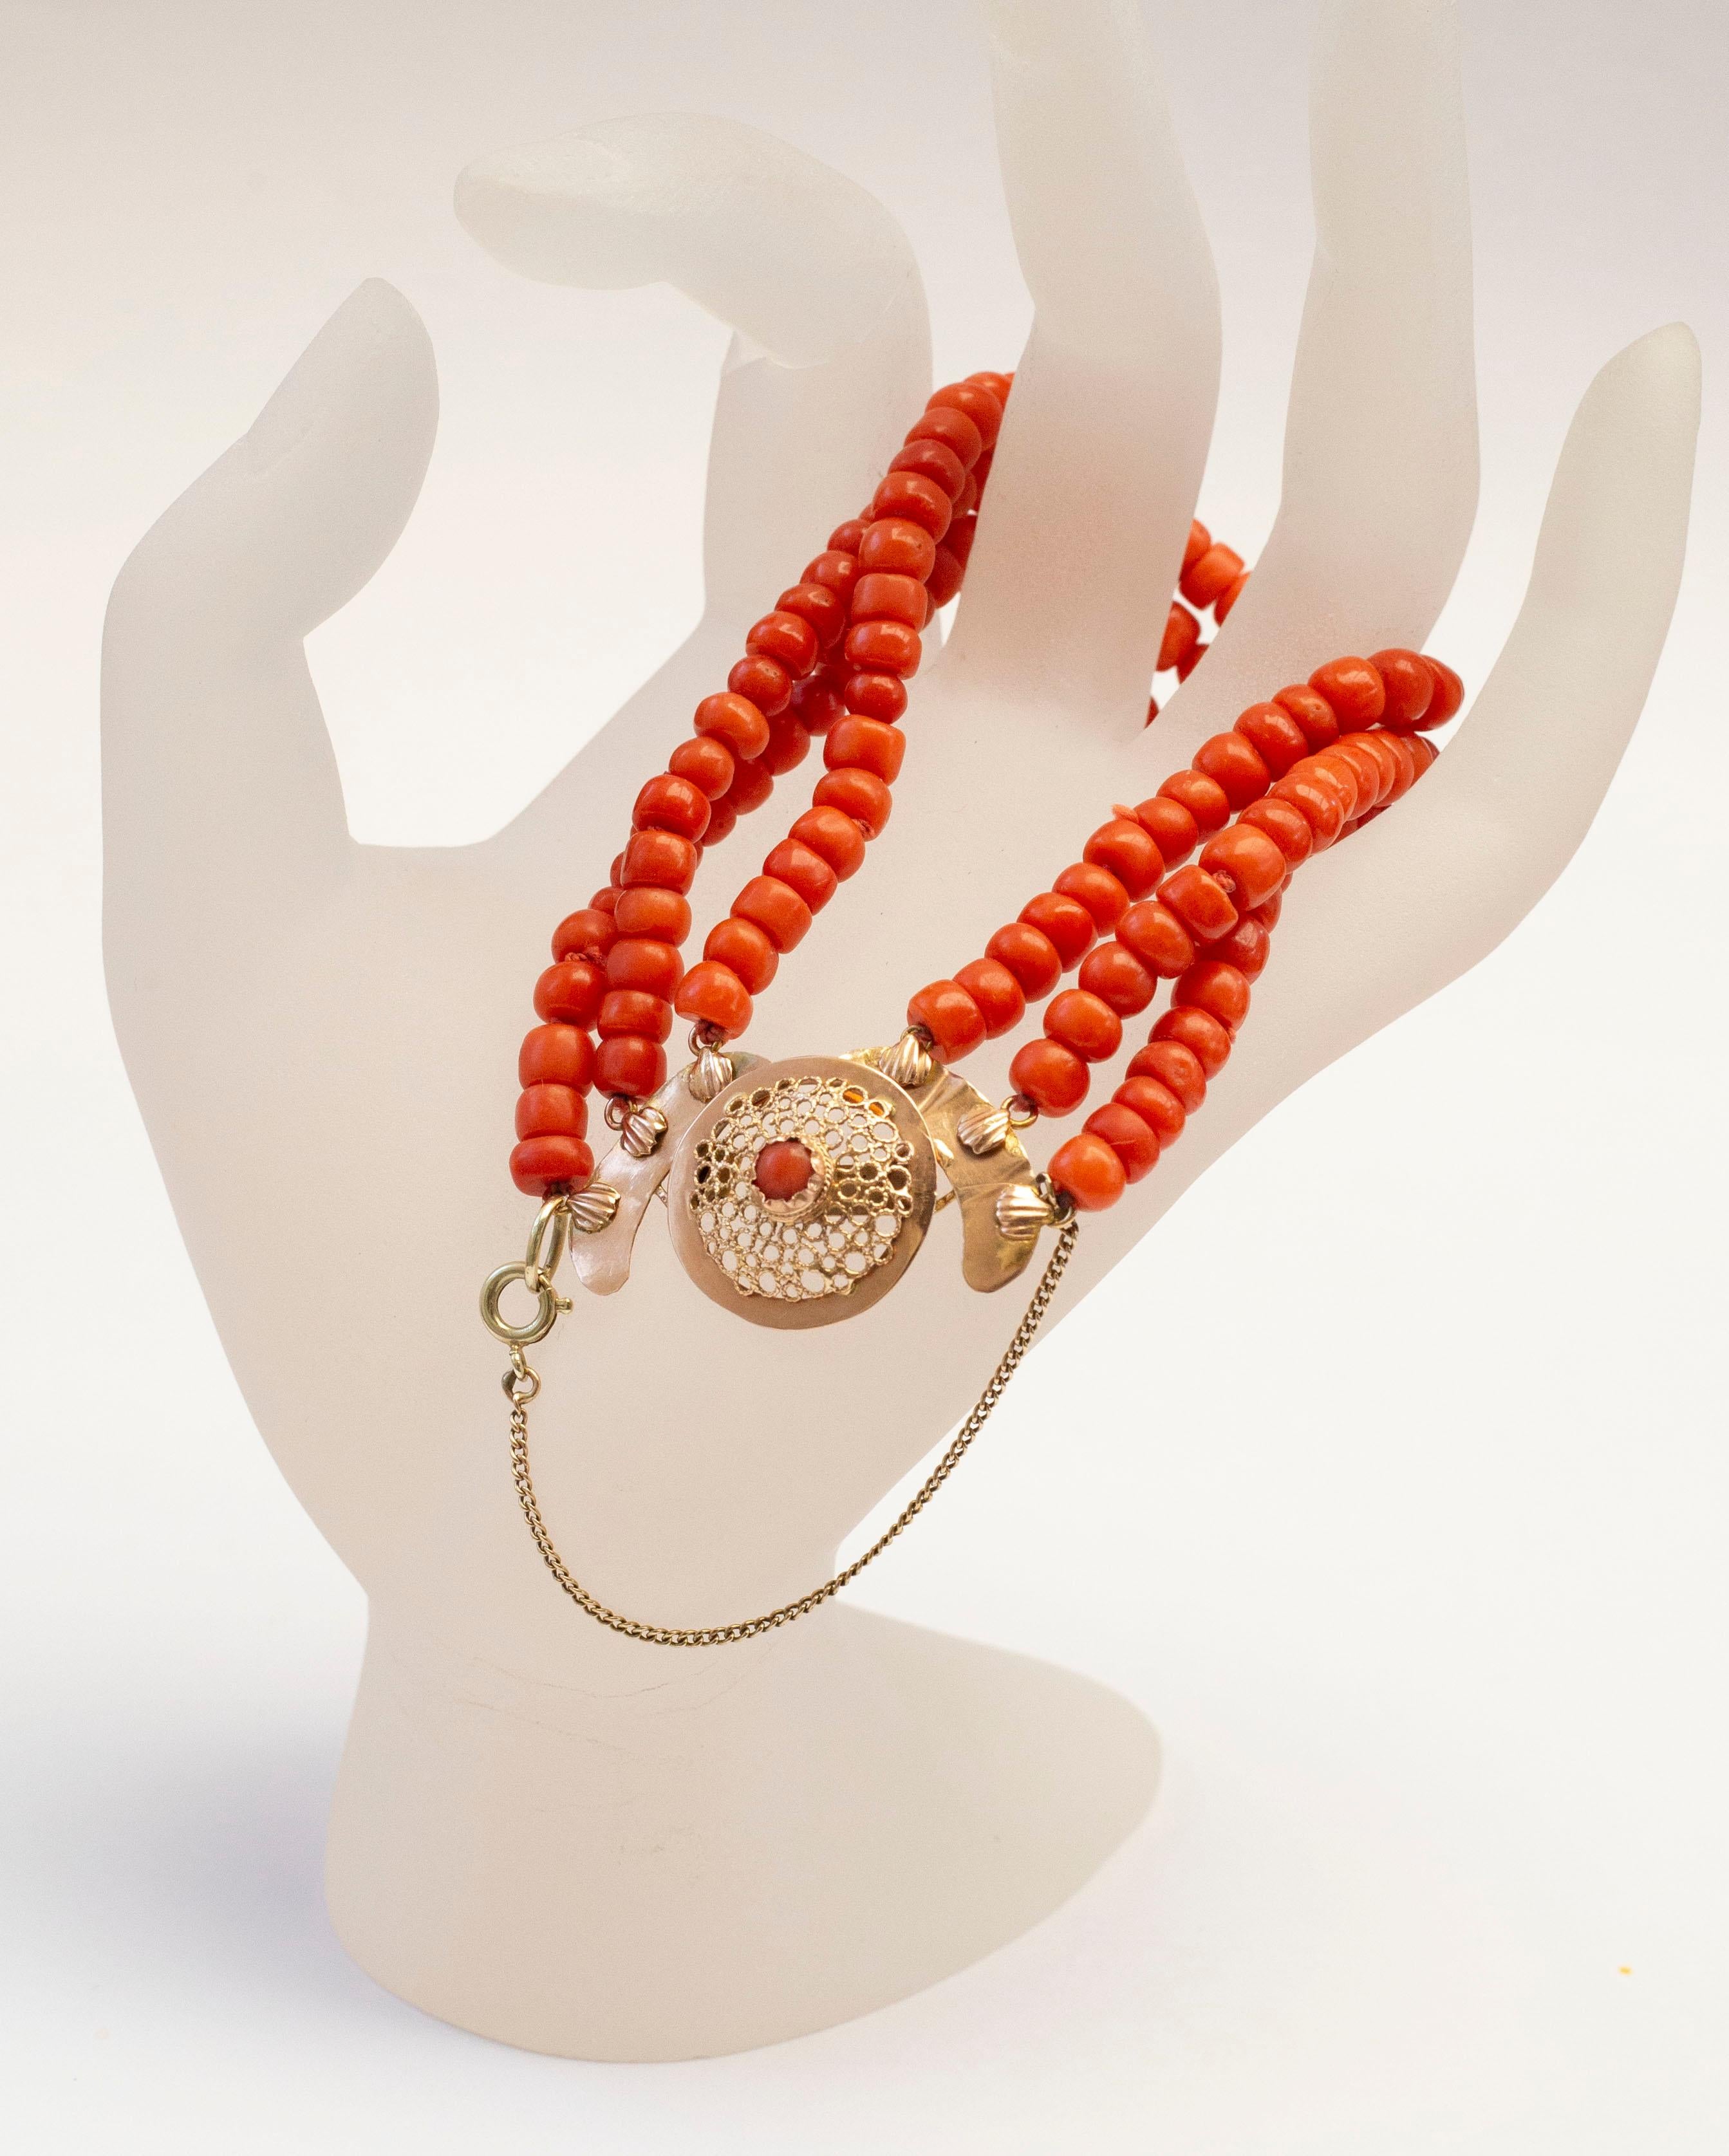 An antique 3-row natural not dyed red coral bracelet with round filigree 14 karat yellow clasp with red coral bead in the centre. The clasp features a 14k gold safety chain. The clasp does not have a gold content mark, but it was professionally